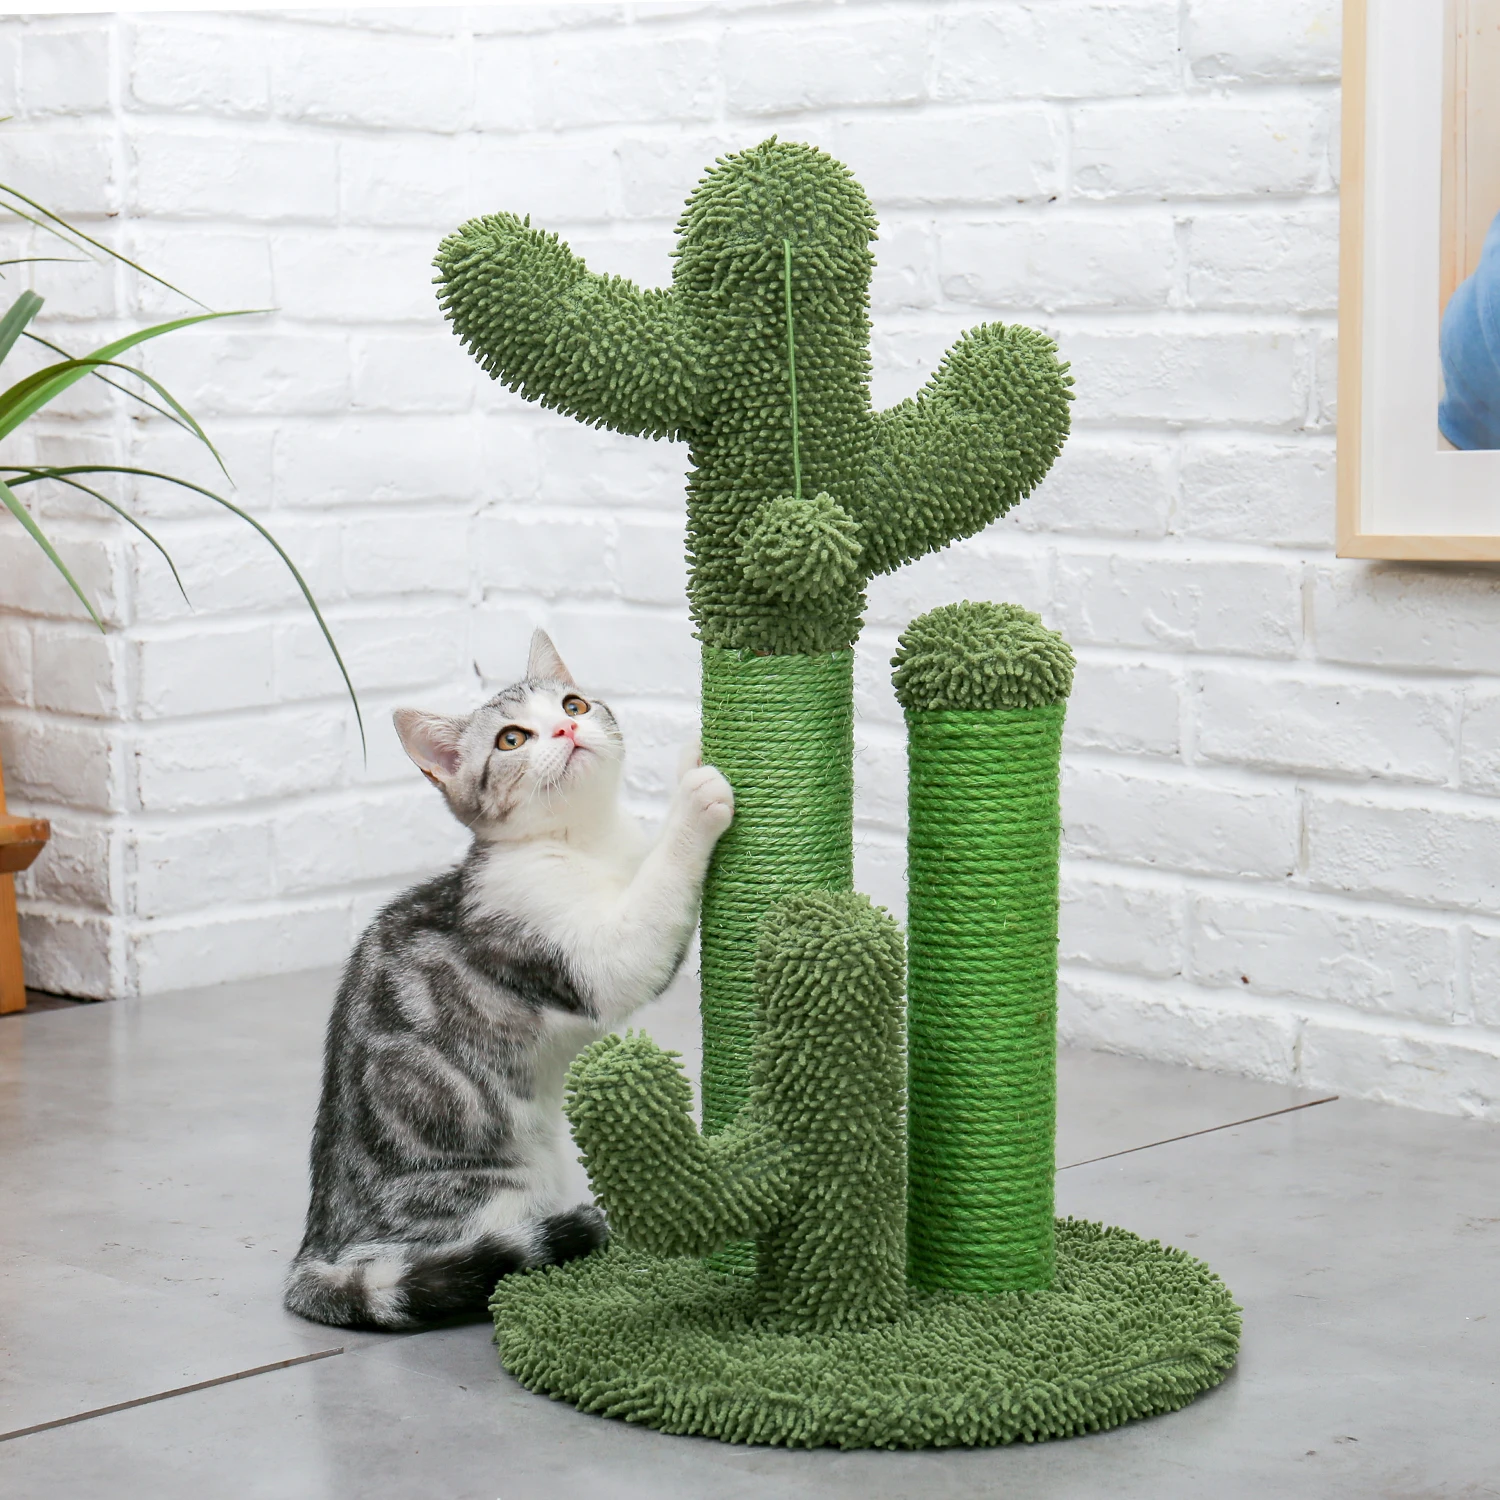 aliexpress - Cute Cactus Pet Cat Tree Toys with Ball Scratcher Posts for Cats Kitten Climbing Tree Cat Toy Protecting Furniture Fast Delivery